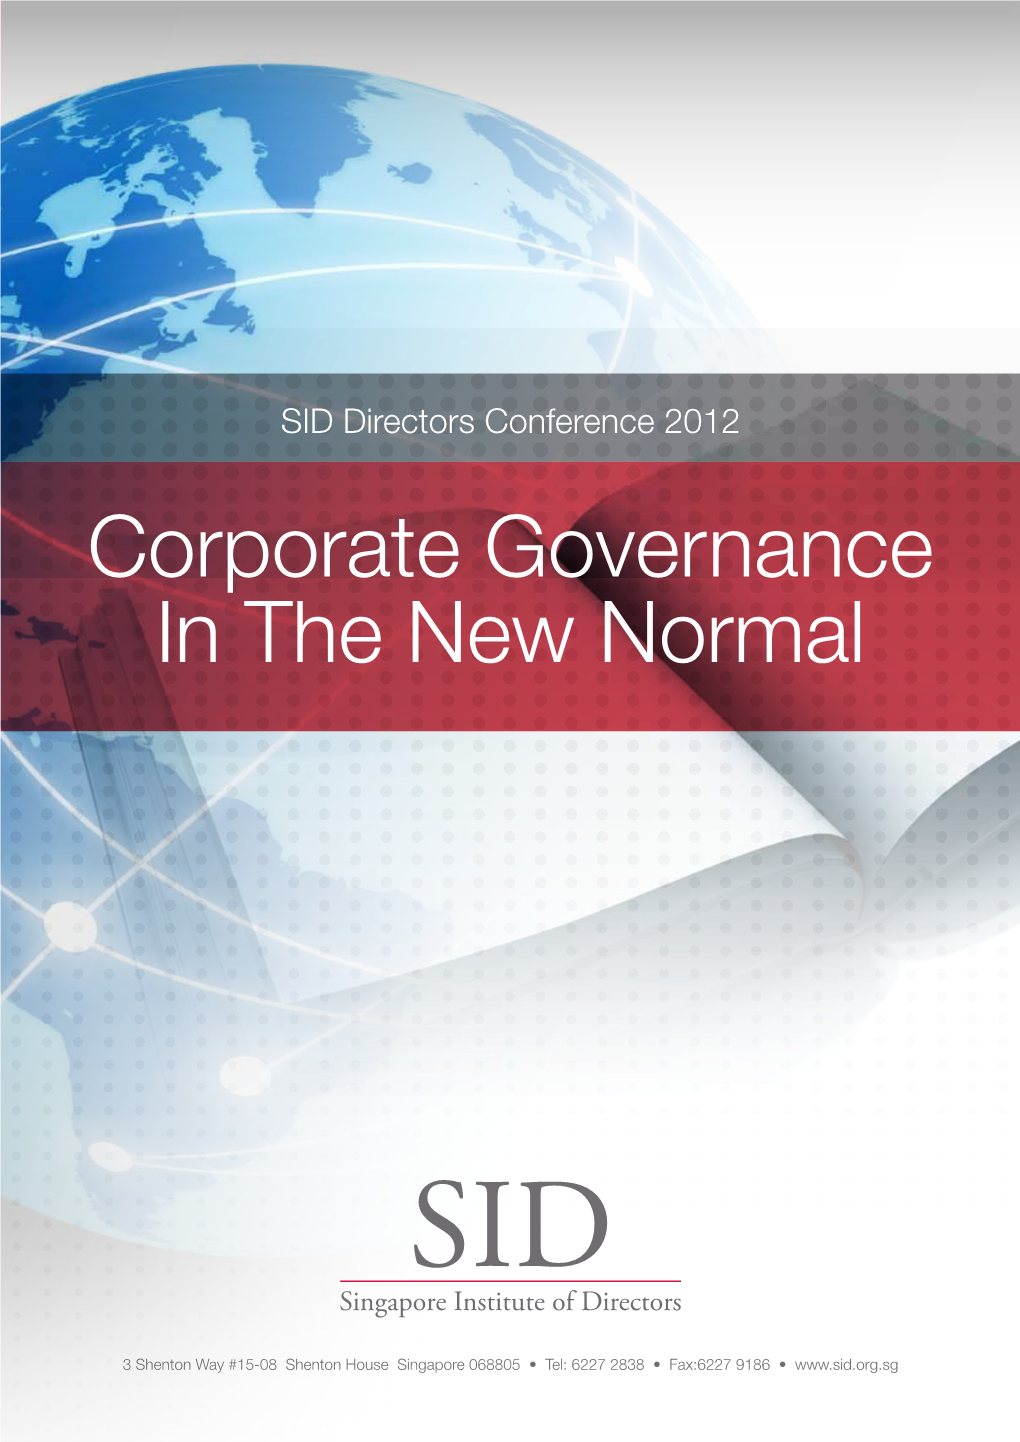 Corporate Governance in the New Normal